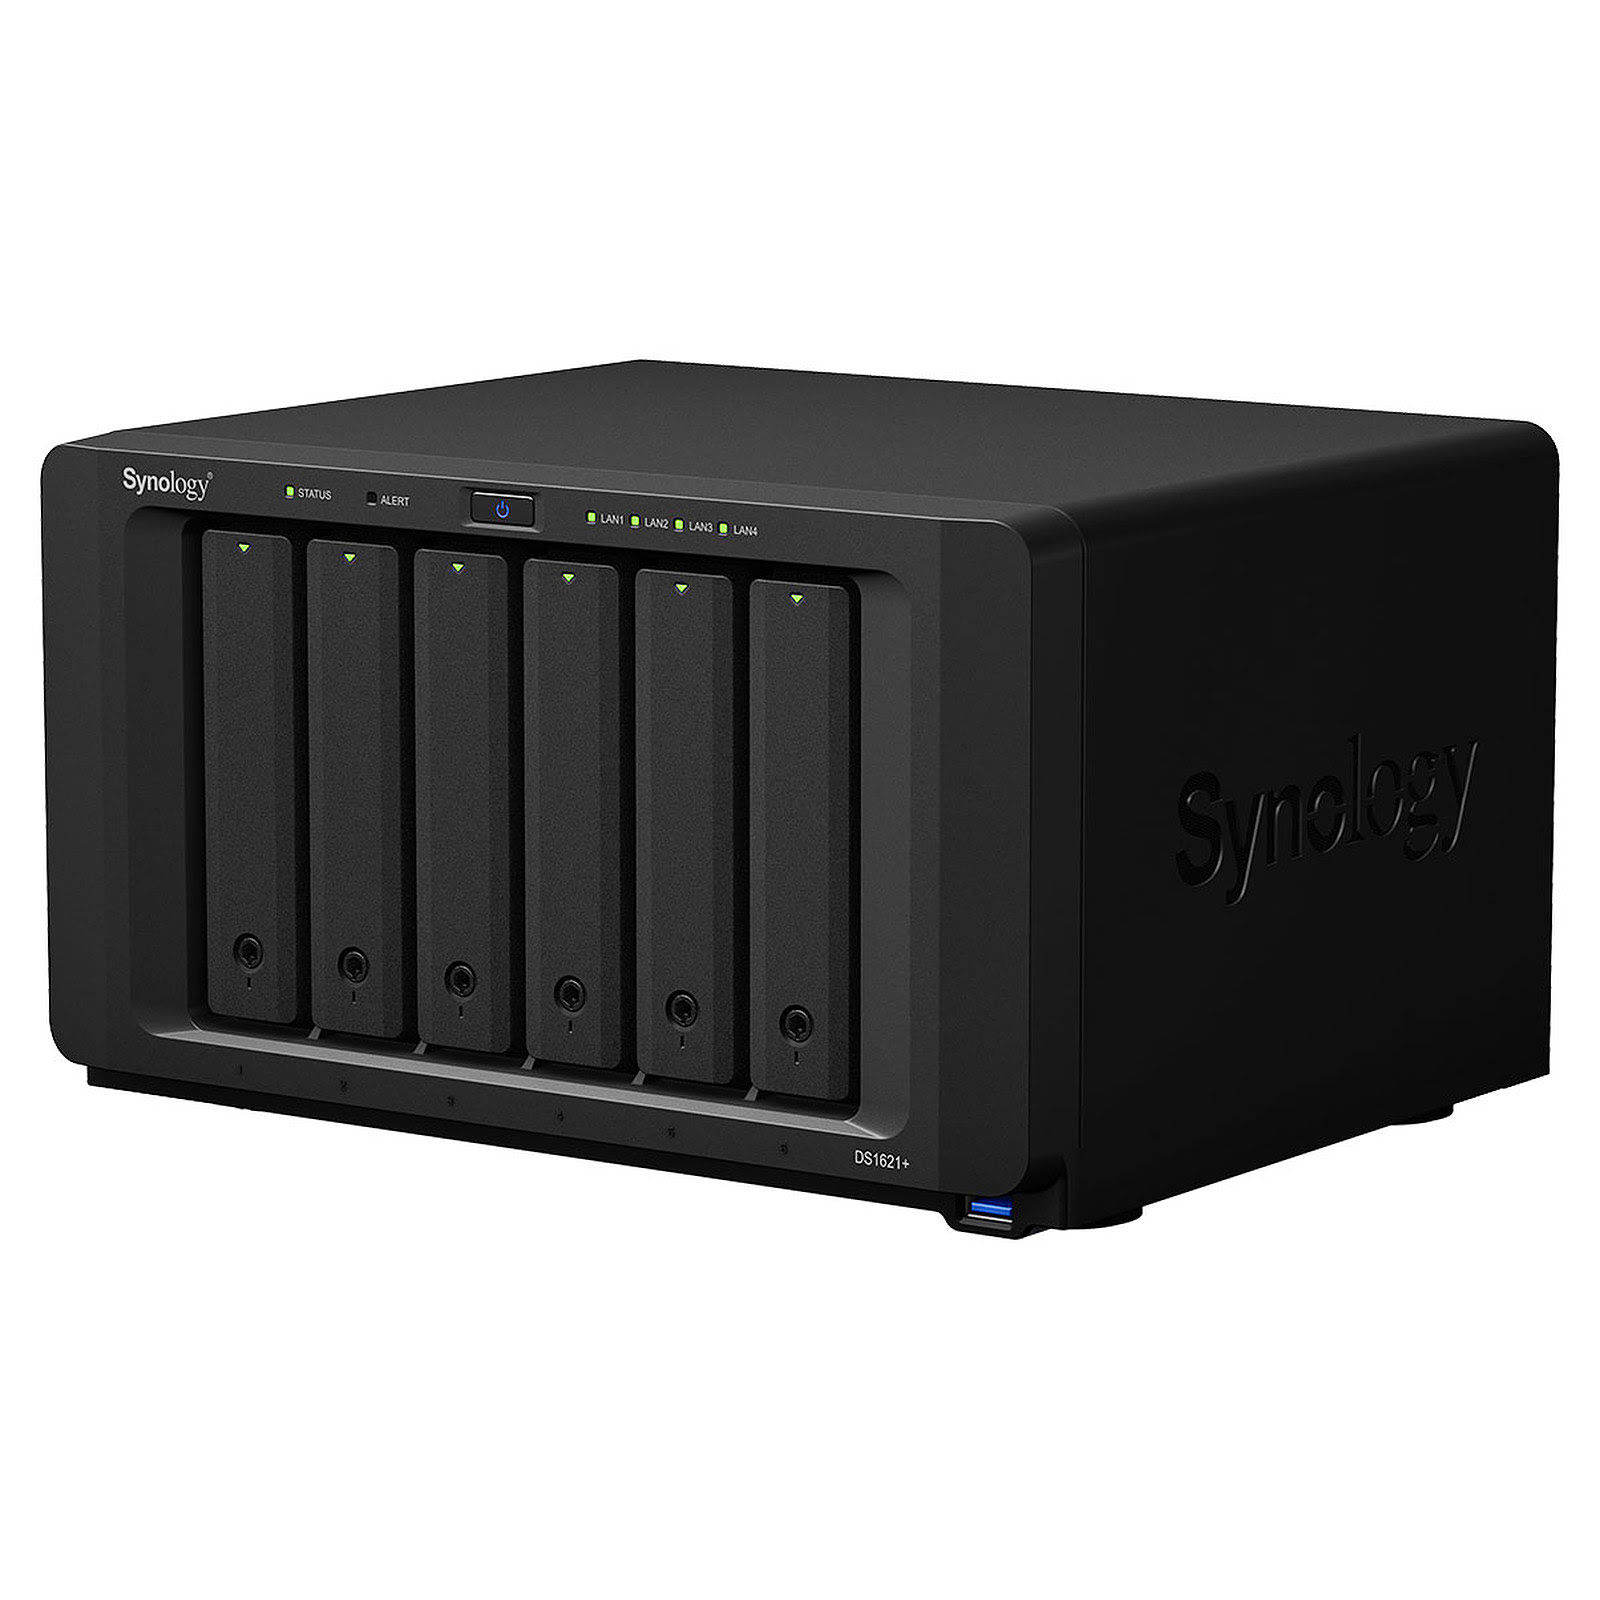 Synology DS1621+ - 6 Baies  - Serveur NAS Synology - grosbill-pro.com - 2